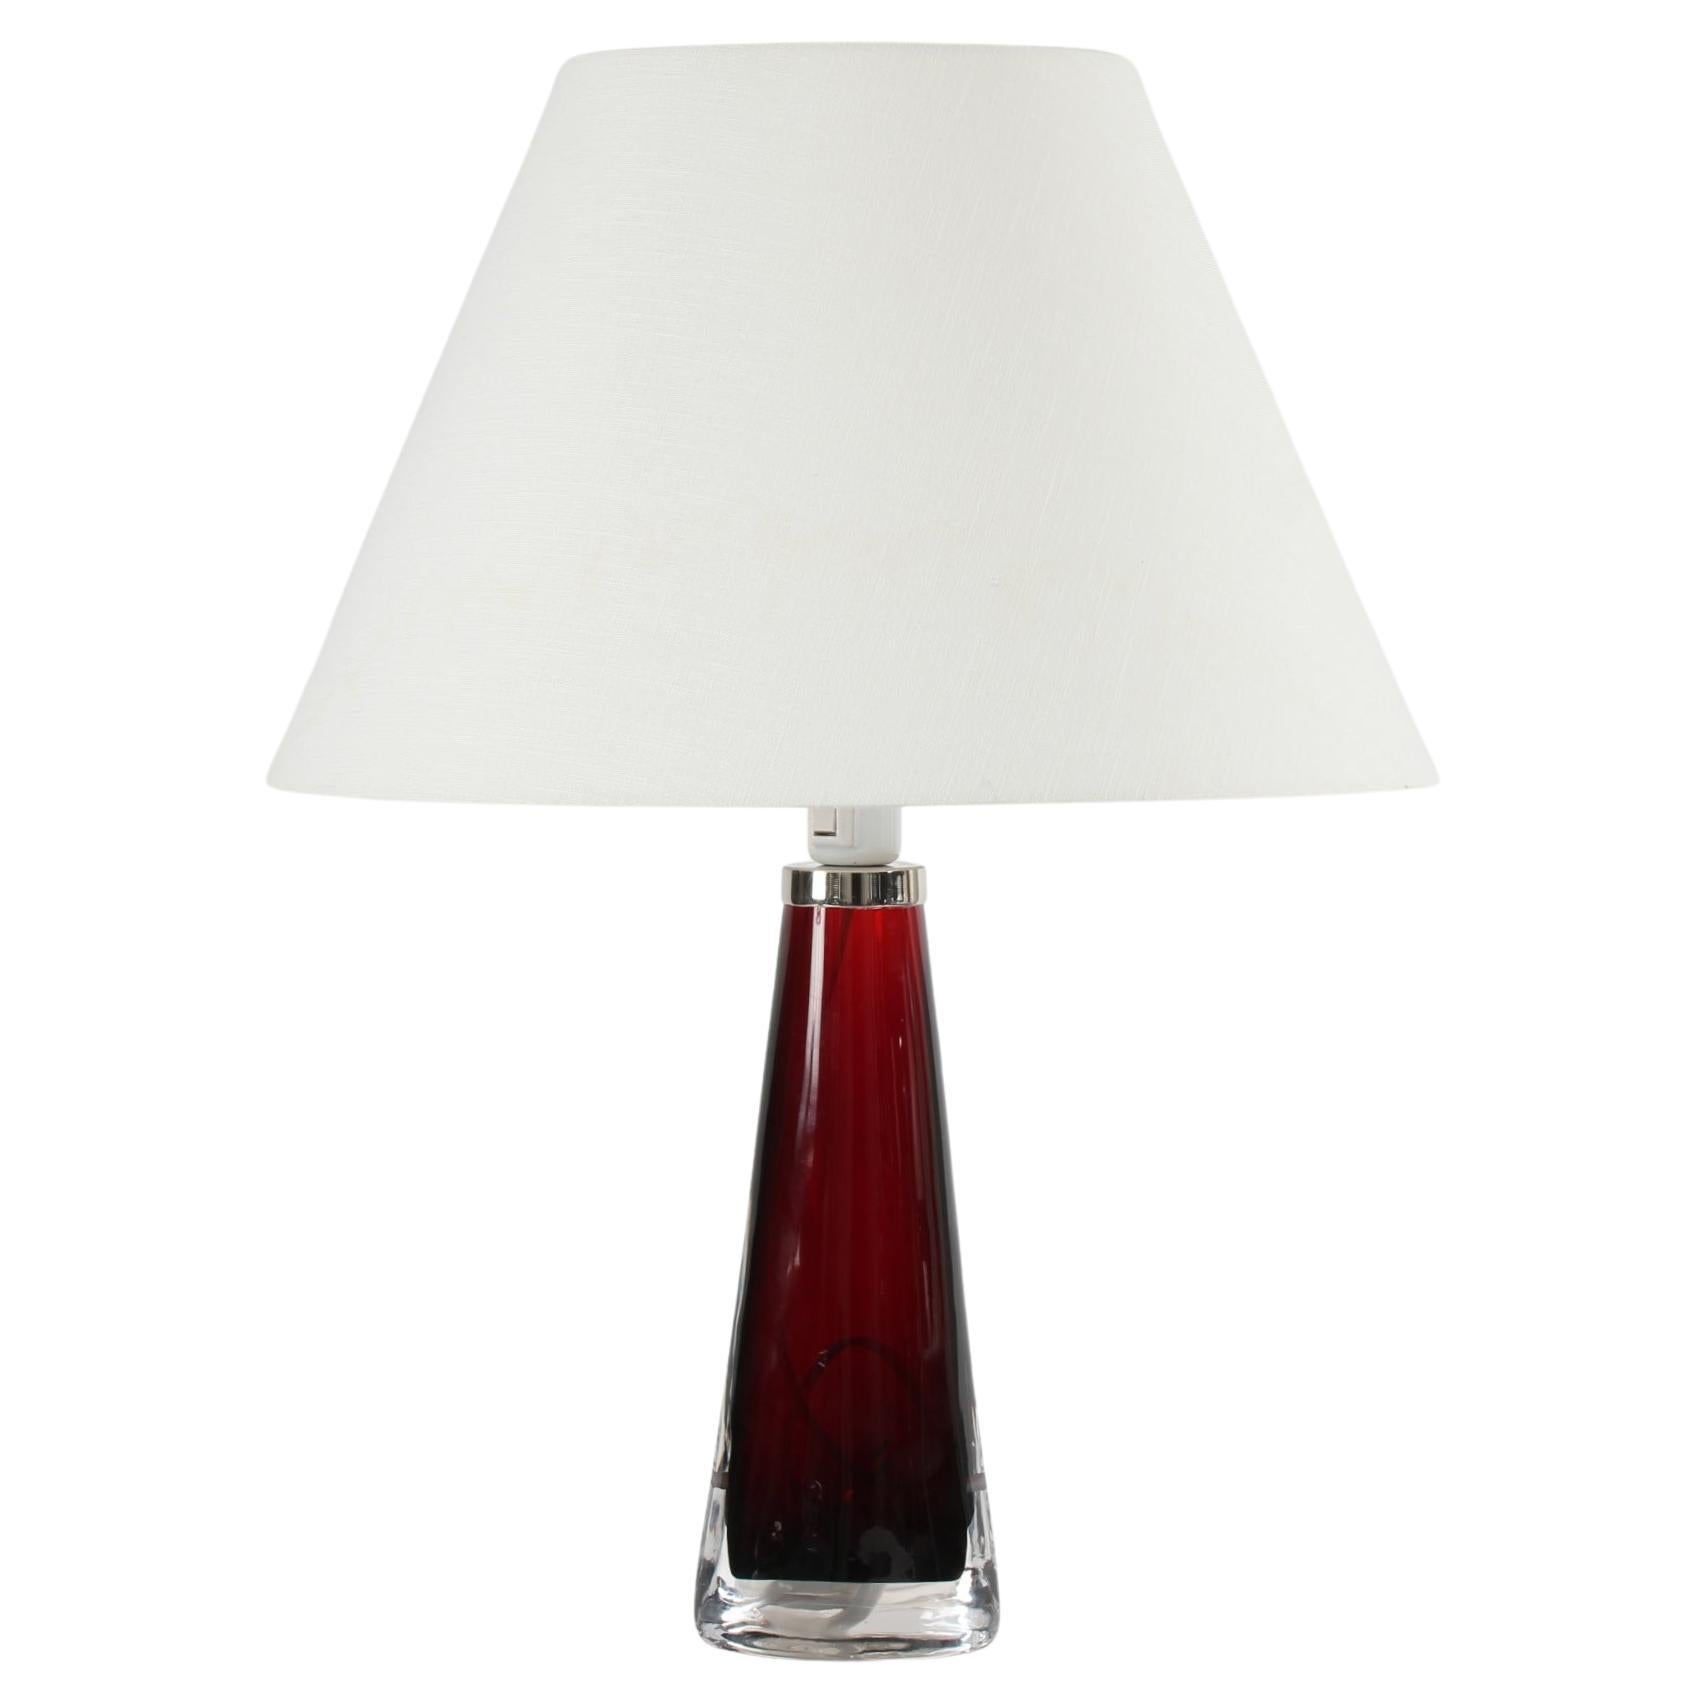 Tall Carl Fagerlund Red Glass Table Lamp for Orrefors, Sweden, 1970s For Sale